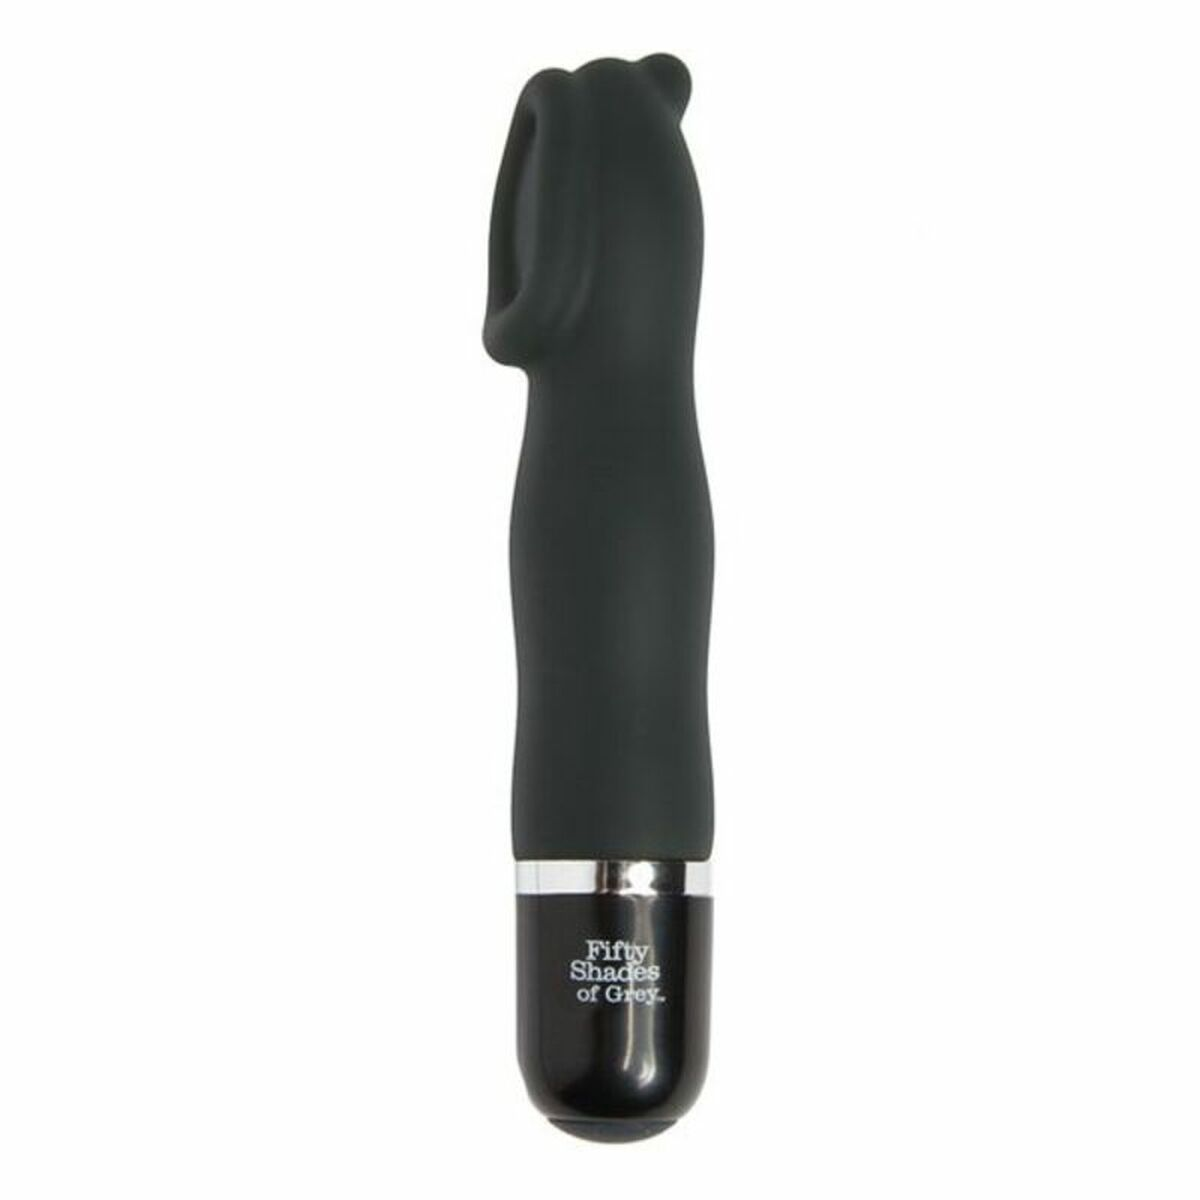 OF GREY Touch Sweet FIFTY SHADES Vibrator